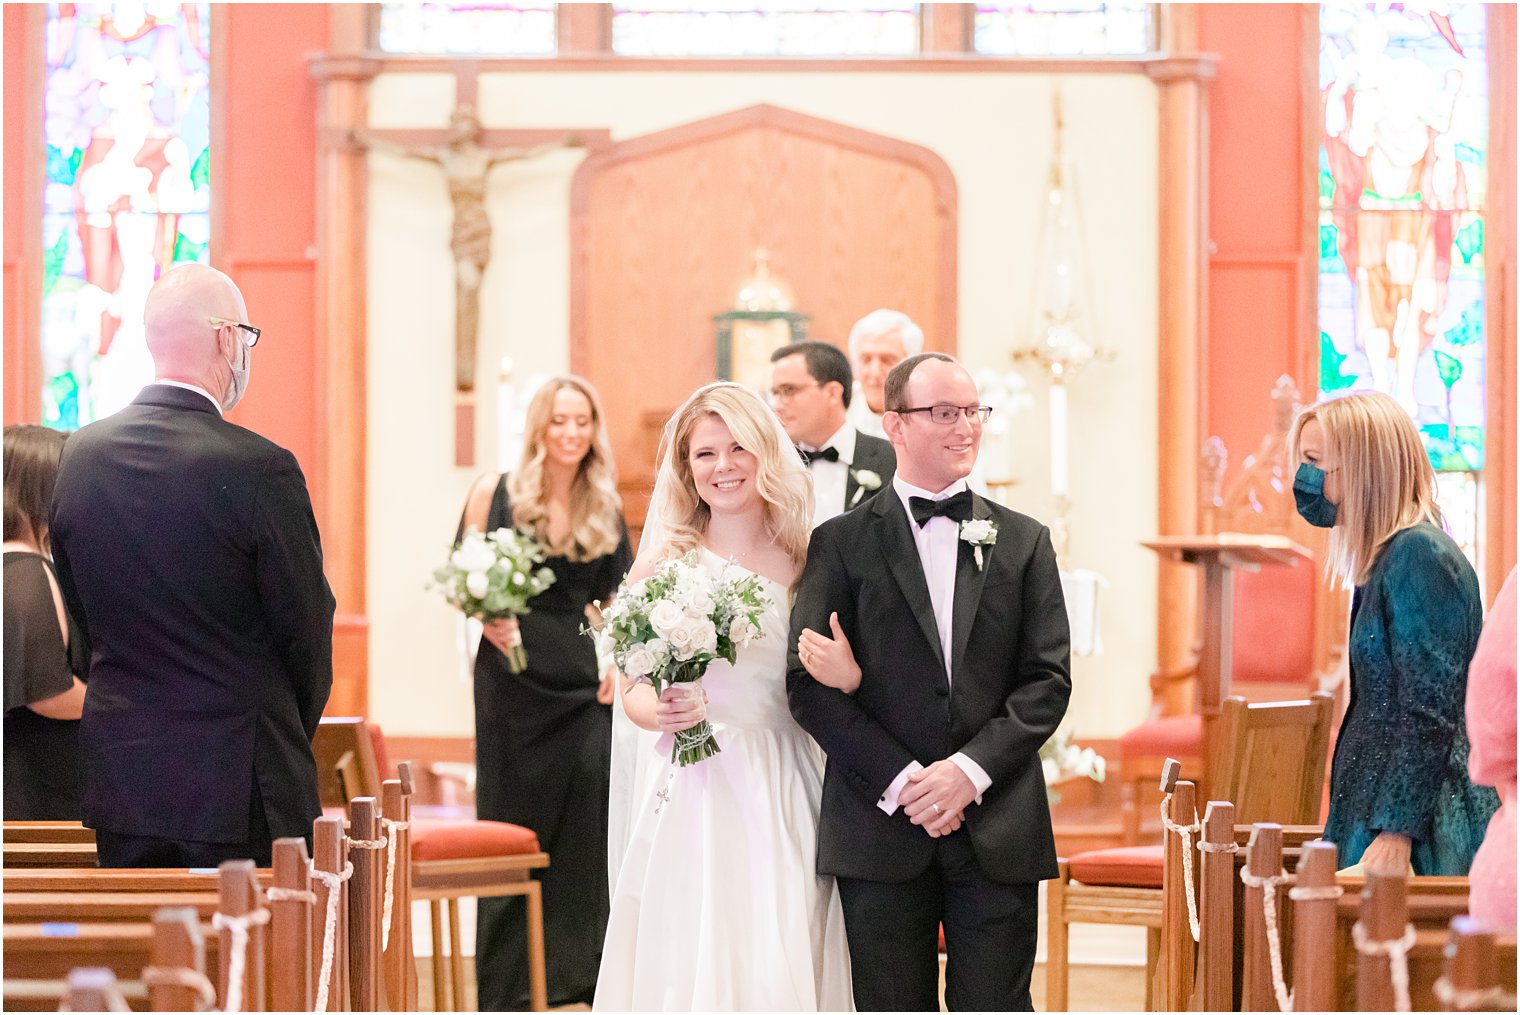 newlyweds walk down aisle after traditional church wedding in New Jersey